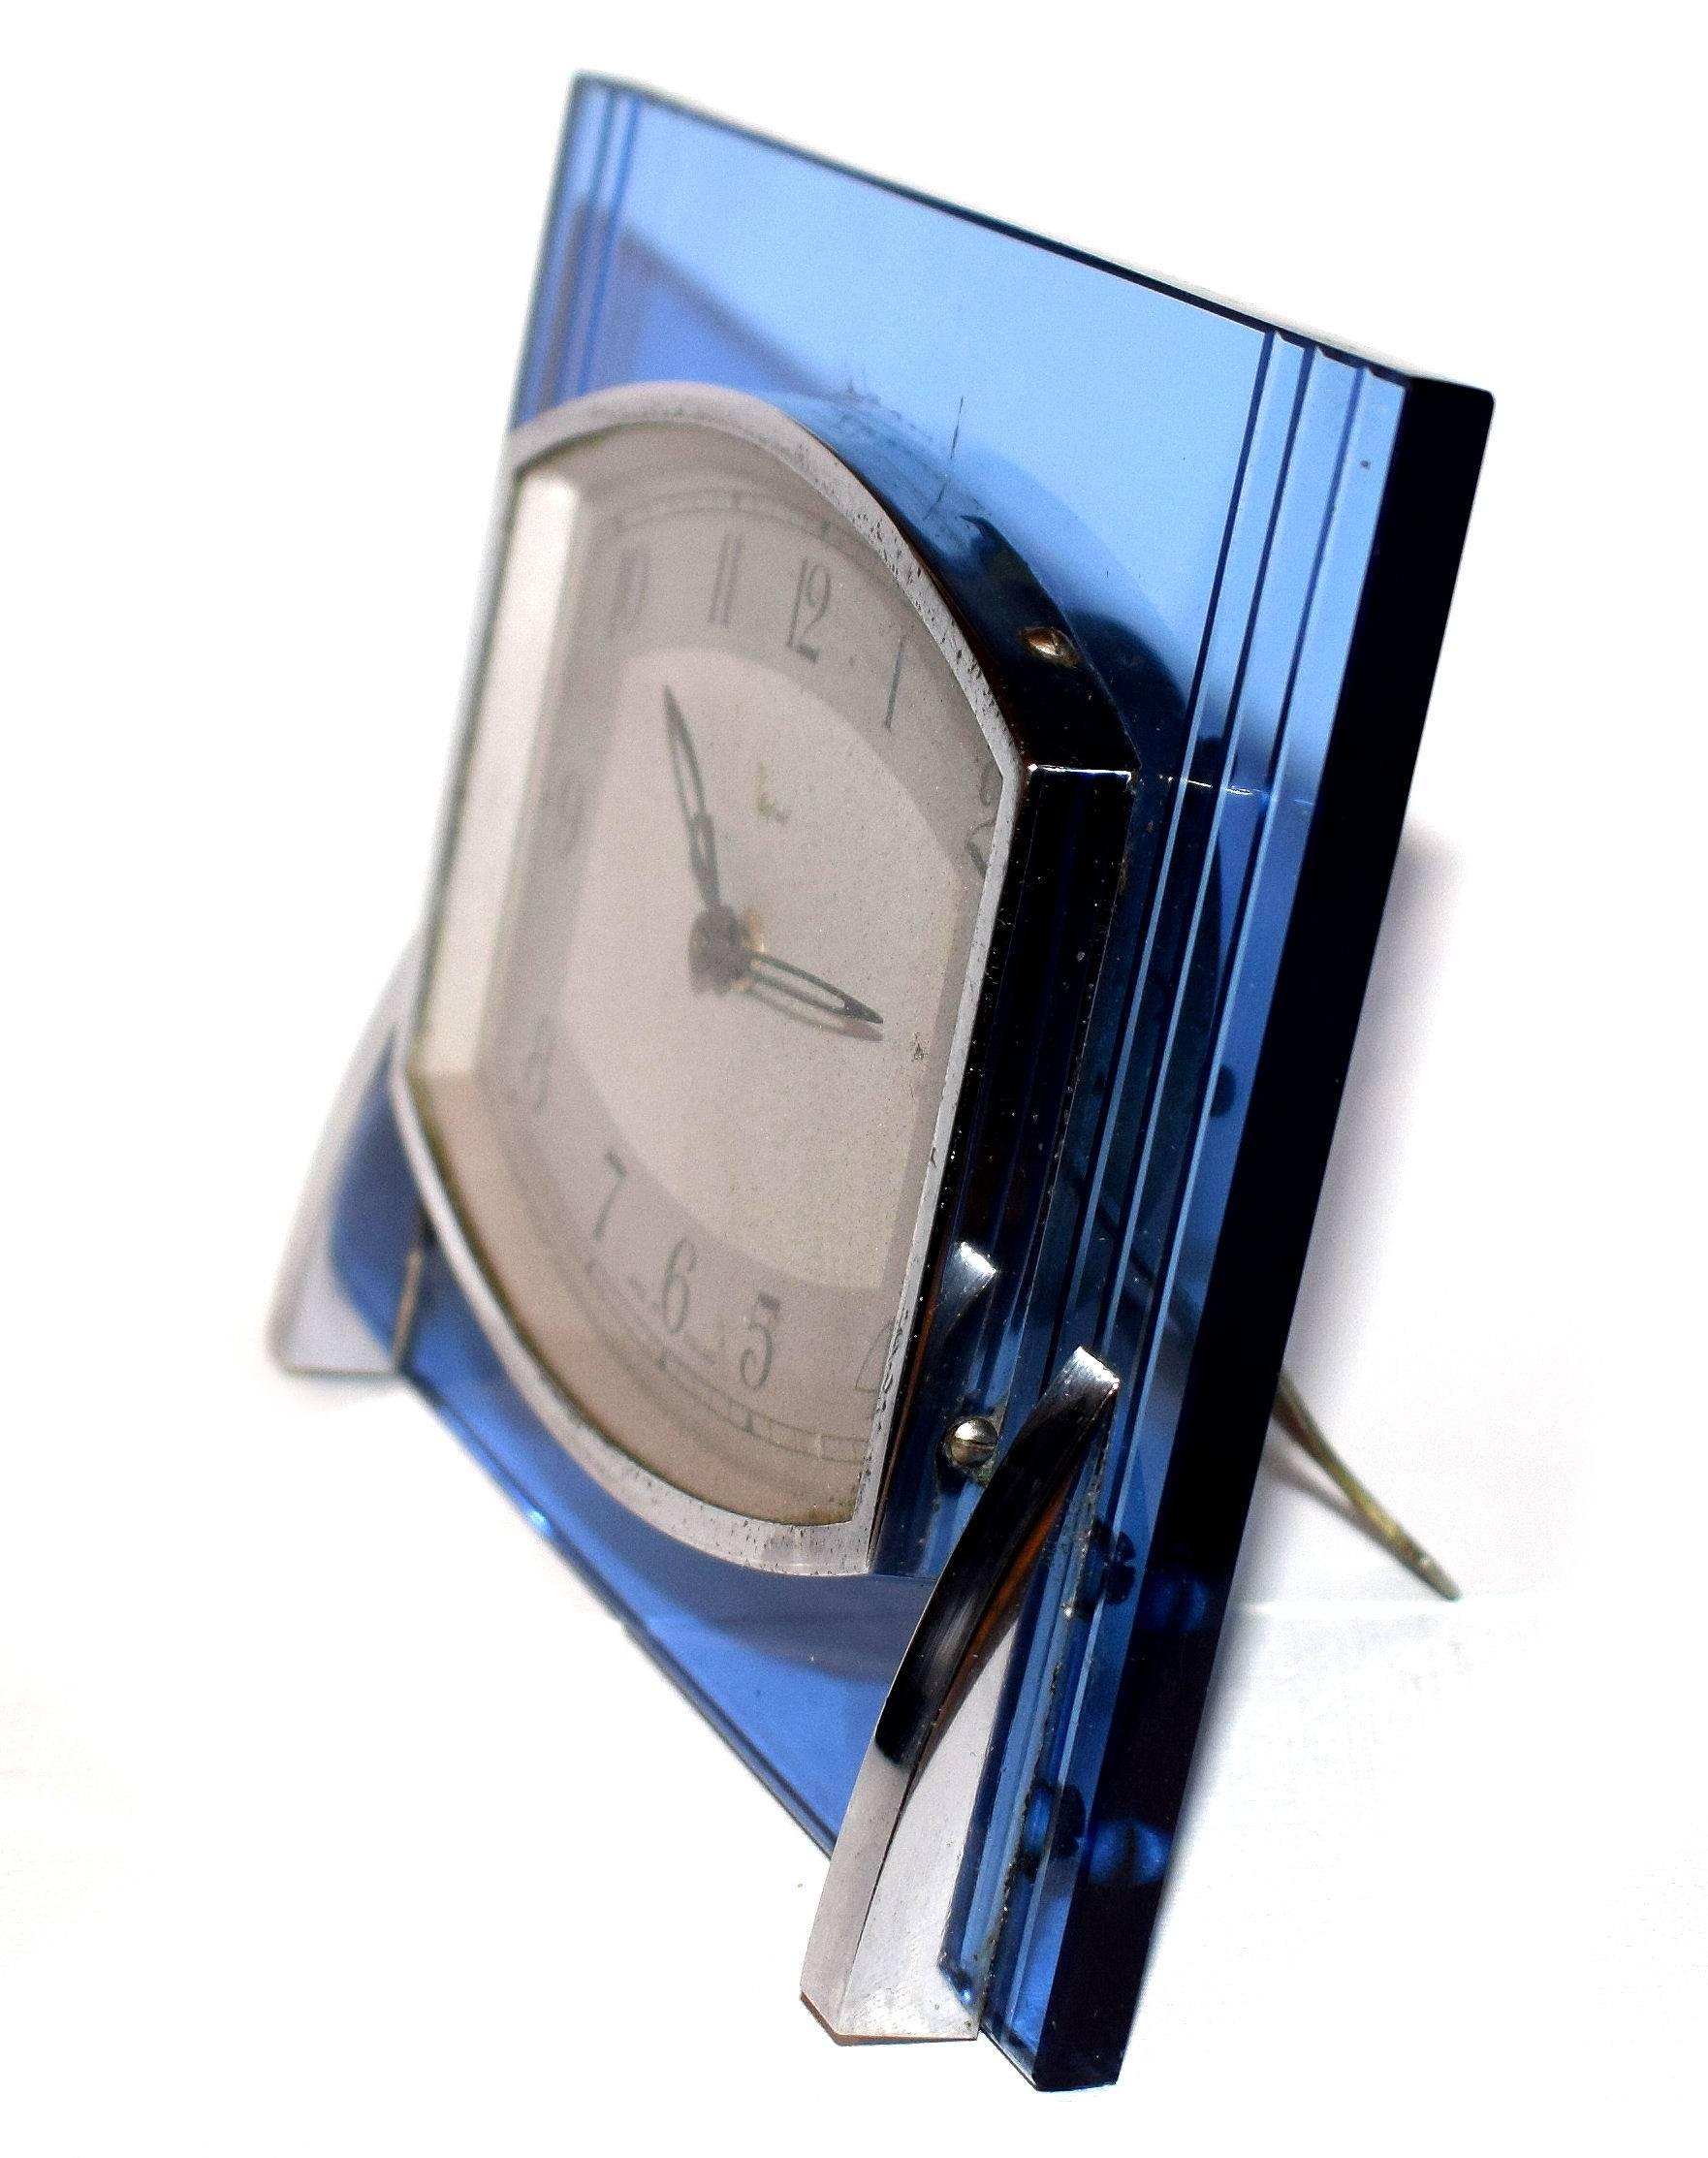 Stylish 1930s English blue glass clock with chrome accents by Enfield. Ideal size for modern use, mantel or desk area. Has a metal easel to the back to stand upright. We've had this clock serviced as with all our clocks and so comes to you in good